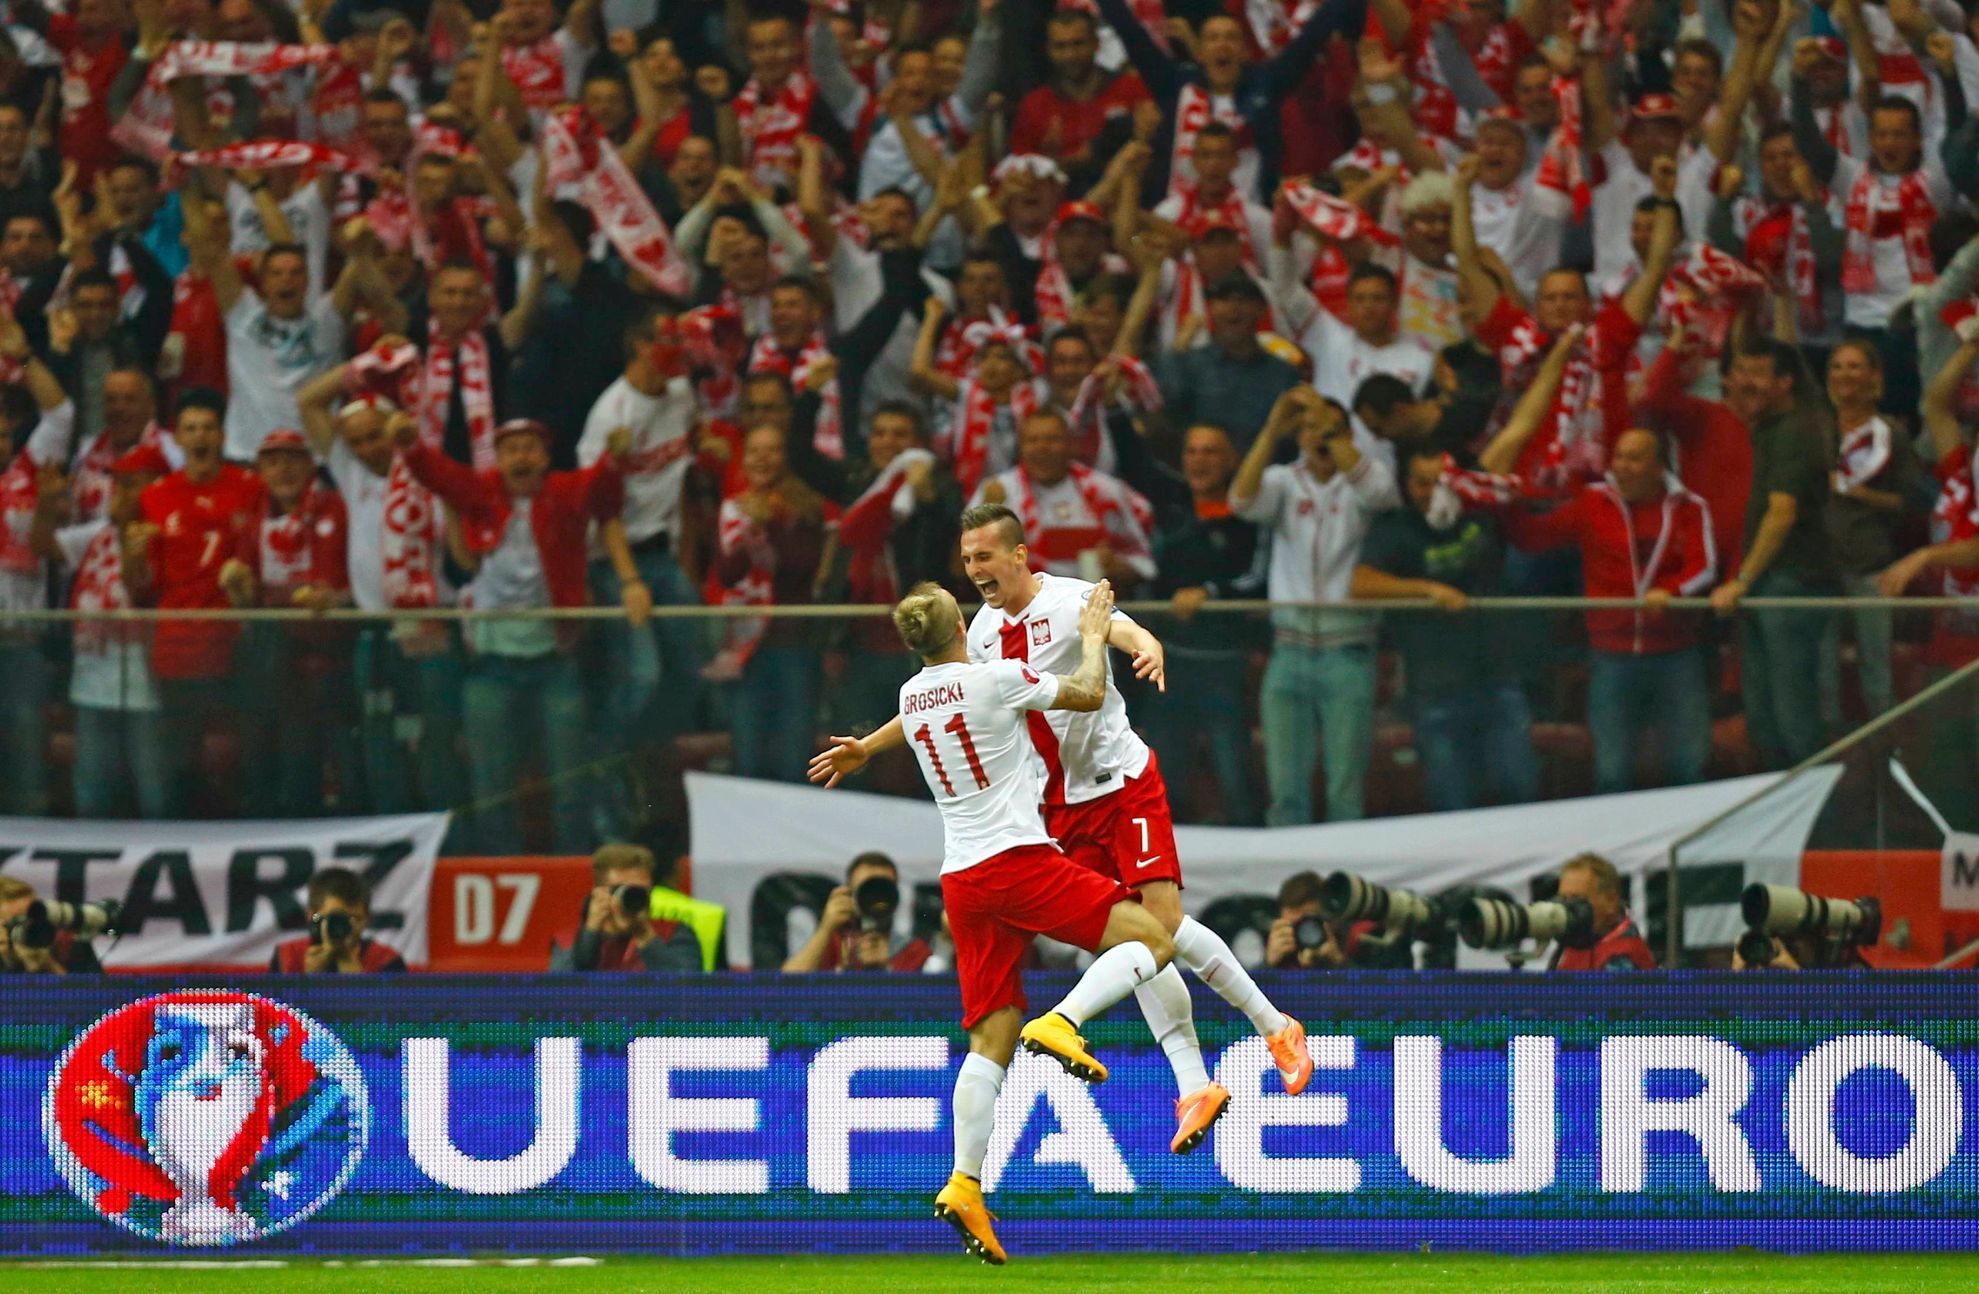 Poland's Milik celebrates with his team mate Grosicki his goal against Germany during their Euro 2016 group D qualifying soccer match at the National stadium in Warsaw